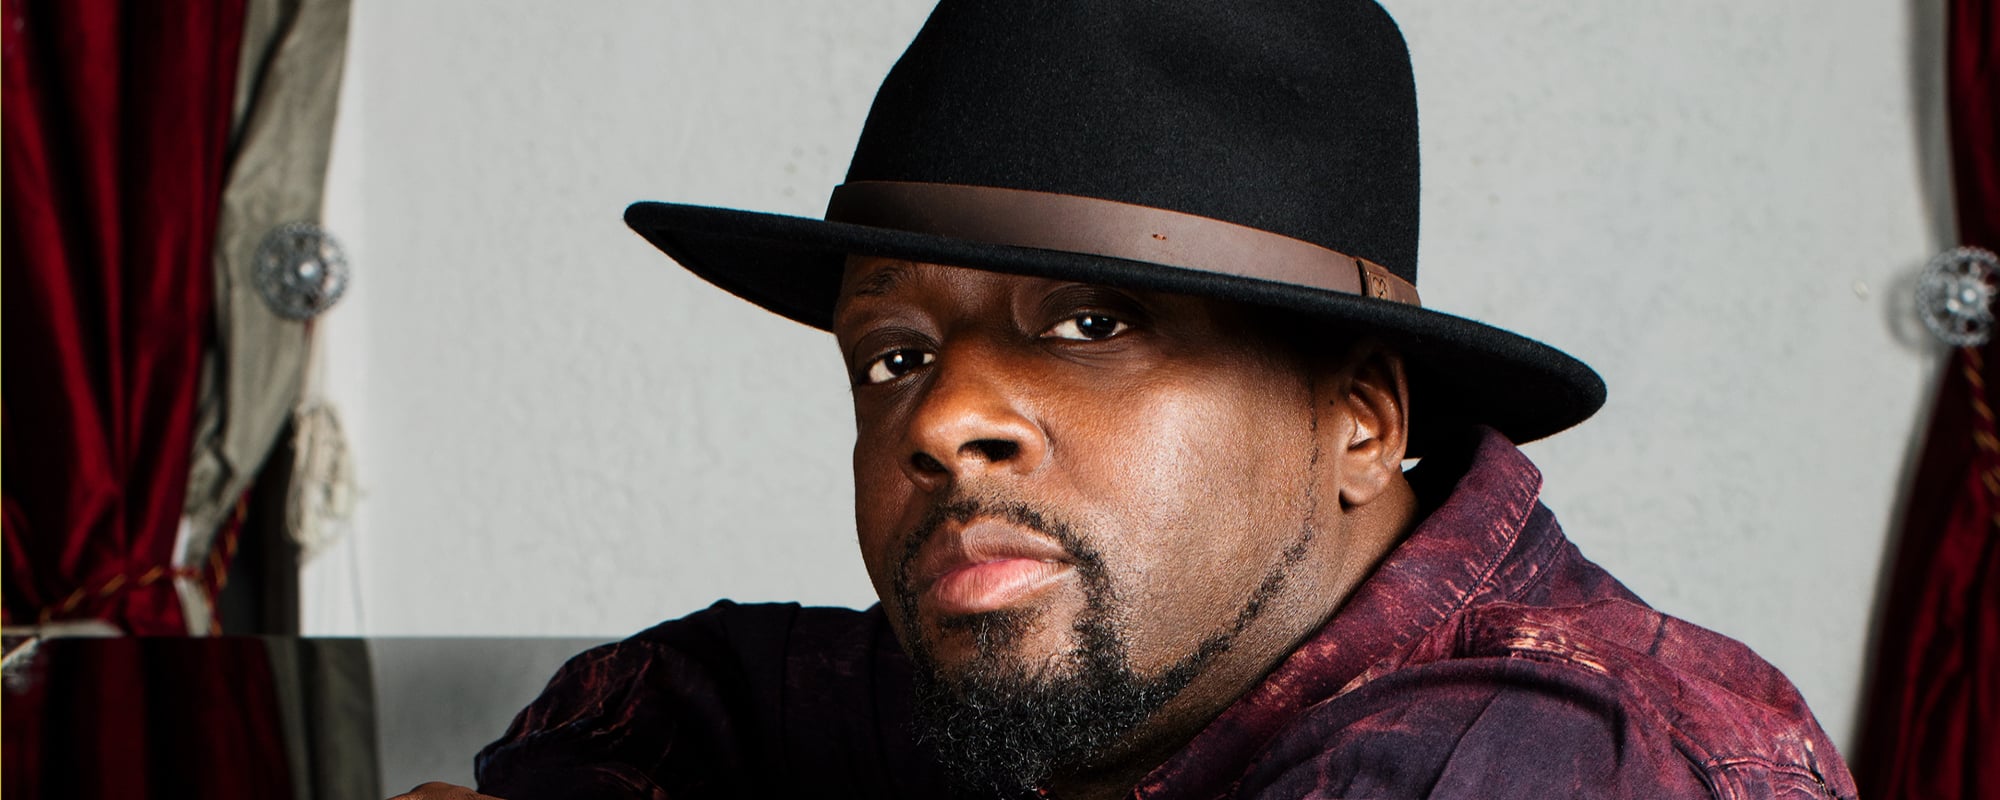 Wyclef Jean Releases Amazon Original Cover of Bob Marley’s “Is This Love”